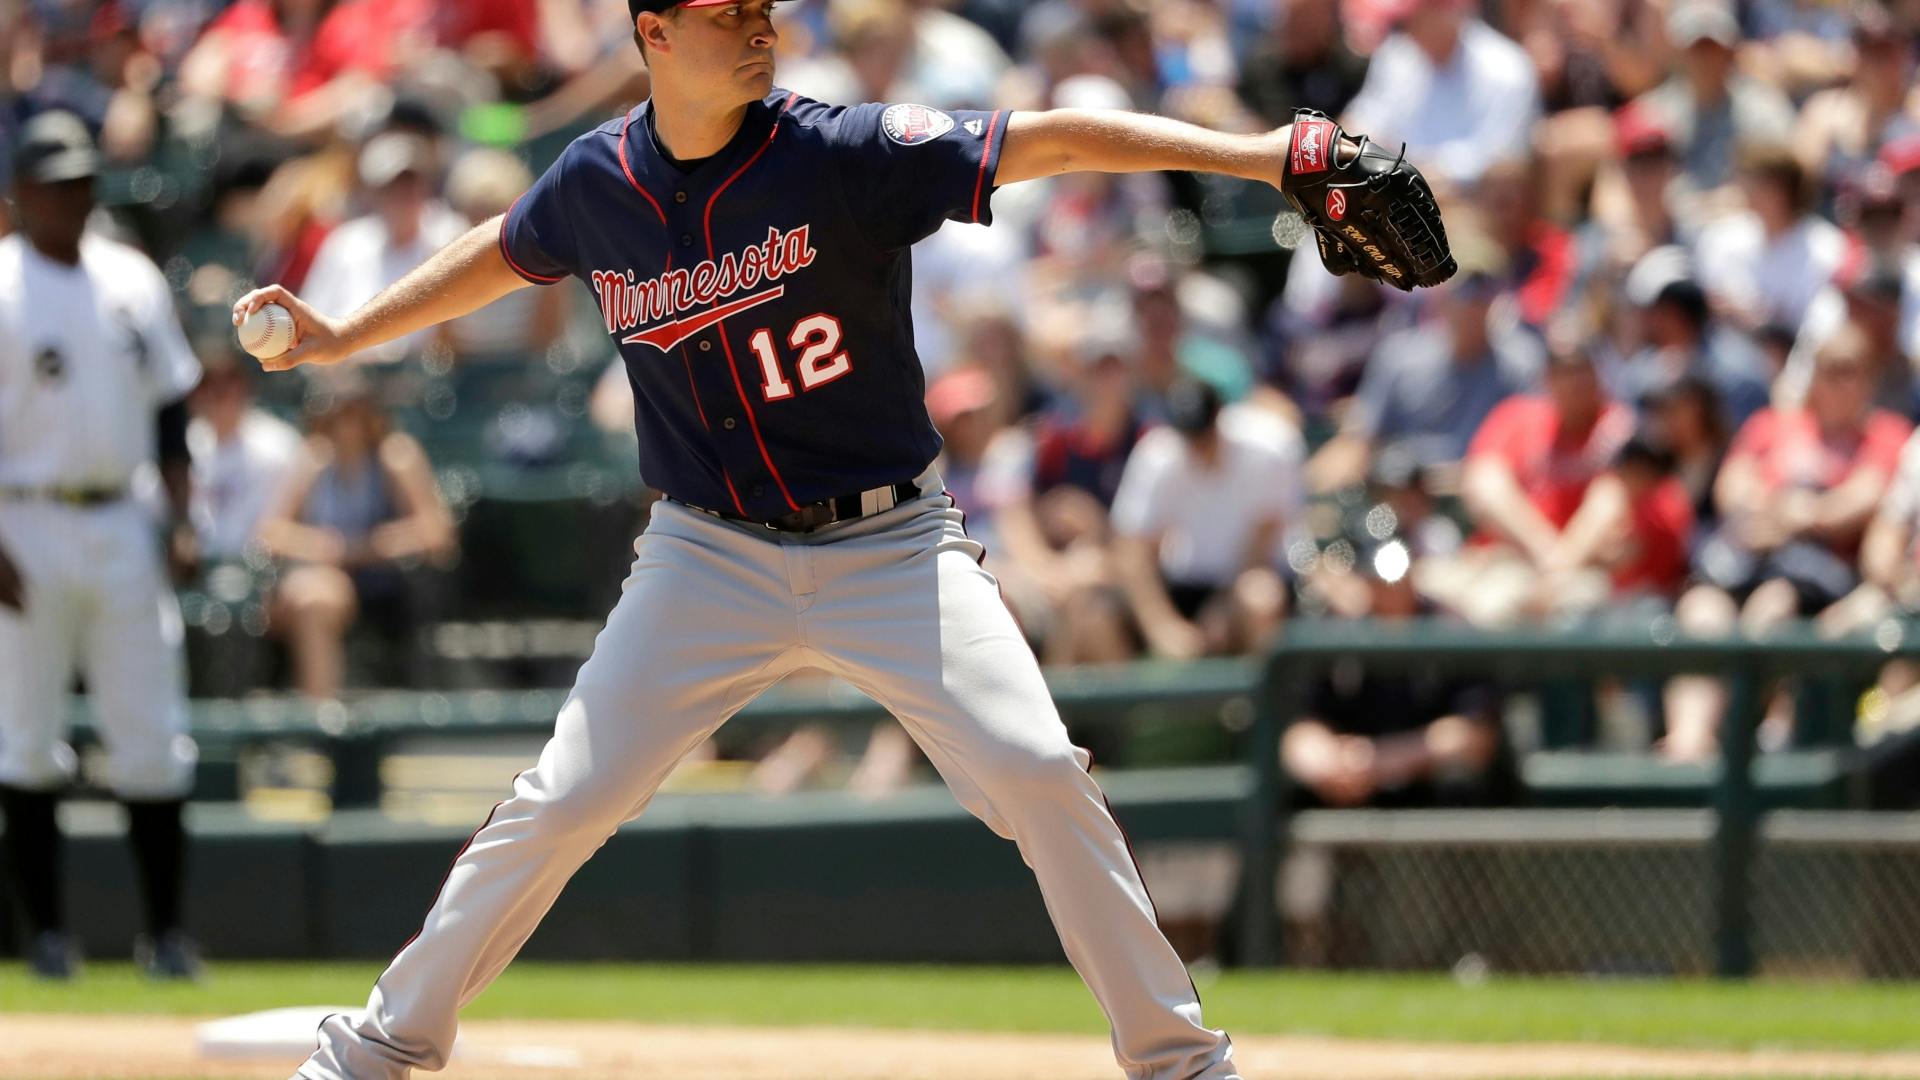 The Twins righthander threw six shutout innings on Thursday as the Twins defeated the White Sox